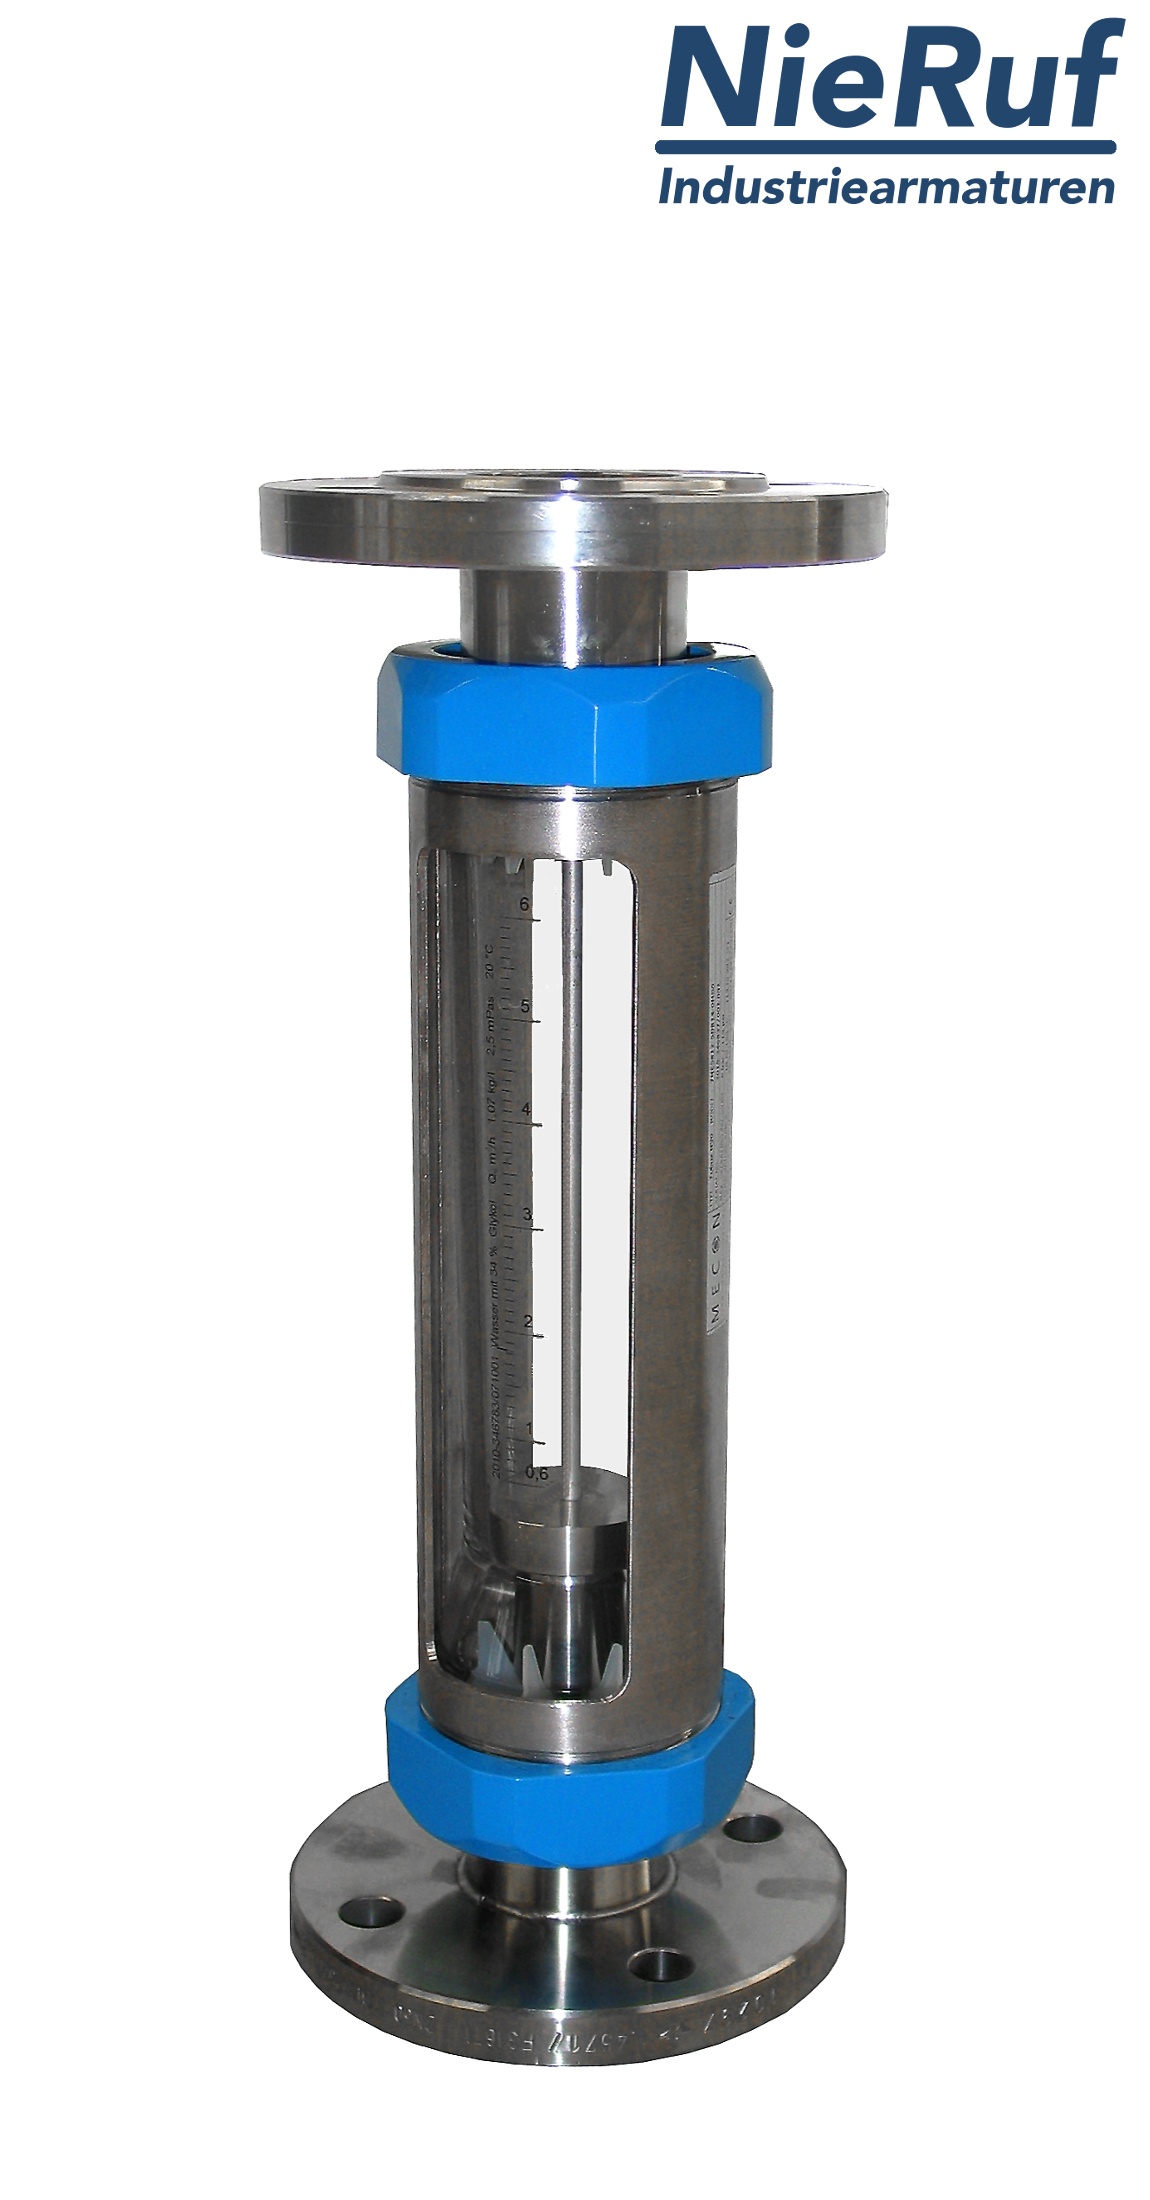 Variable area flowmeter stainless steel + borosilicate flange DN25 31.5 - 315.0 l/h water FKM